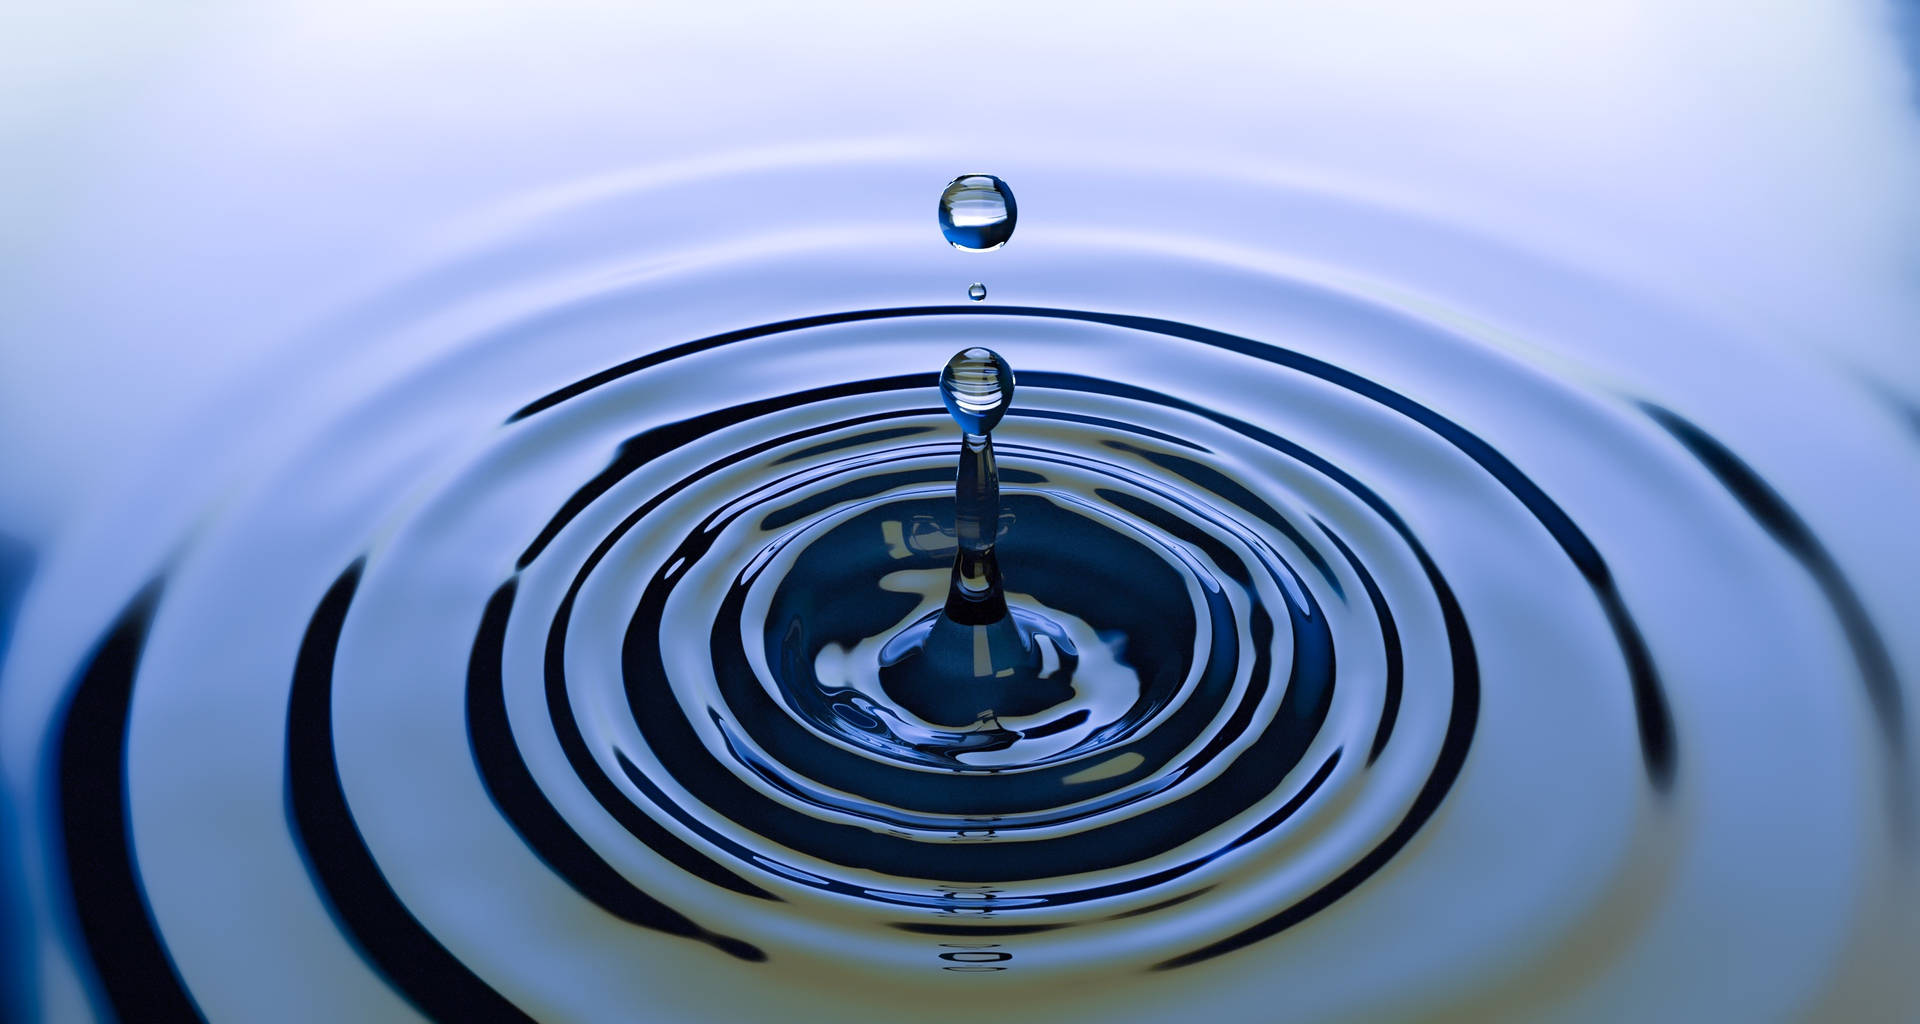 Cool Water Droplet Ripple Effect Background